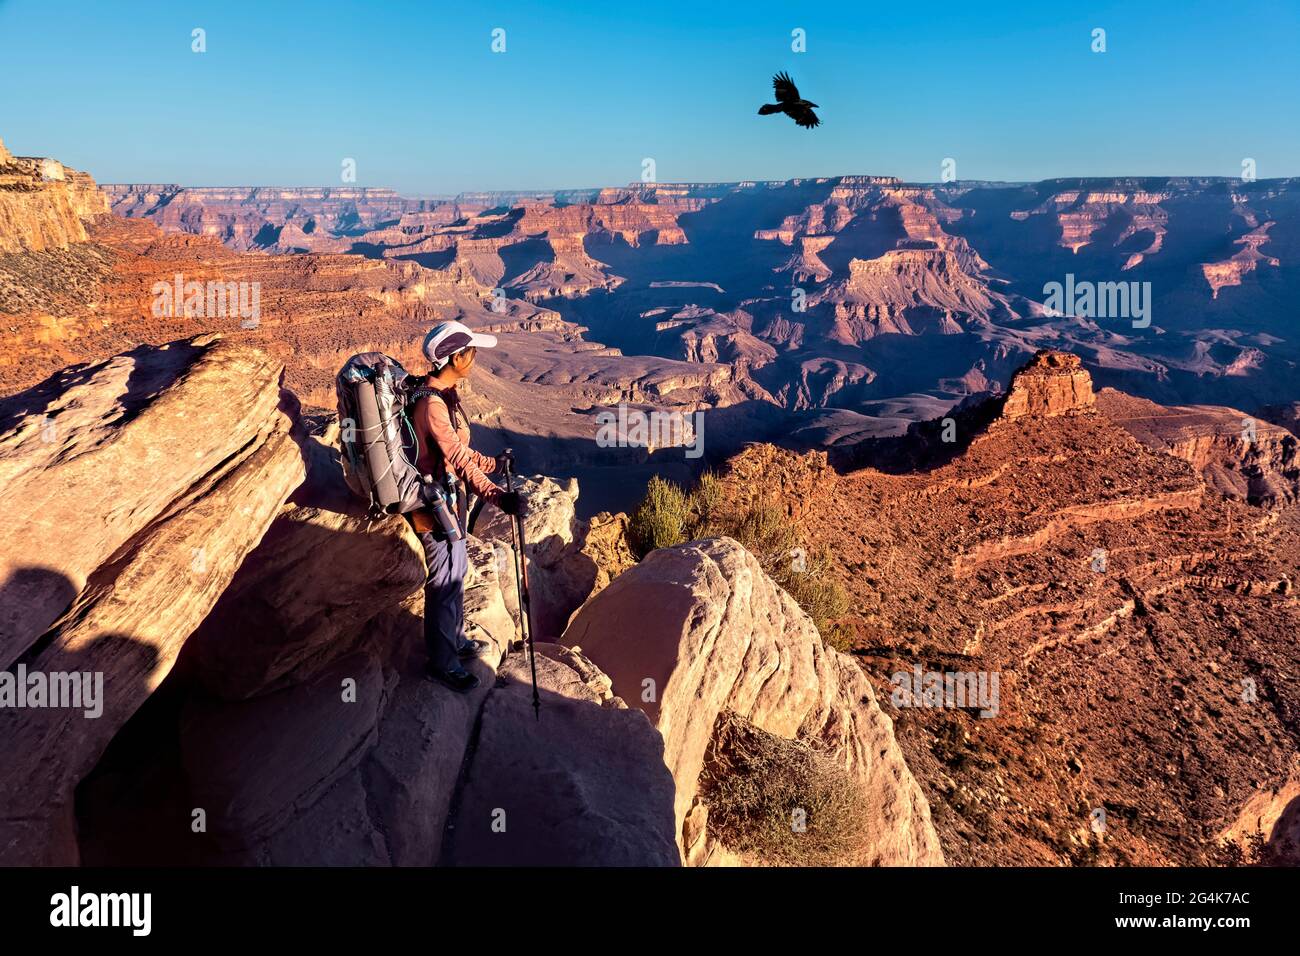 The view from Ooh Aah Point, Grand Canyon National Park, Arizona, U.S.A Stock Photo